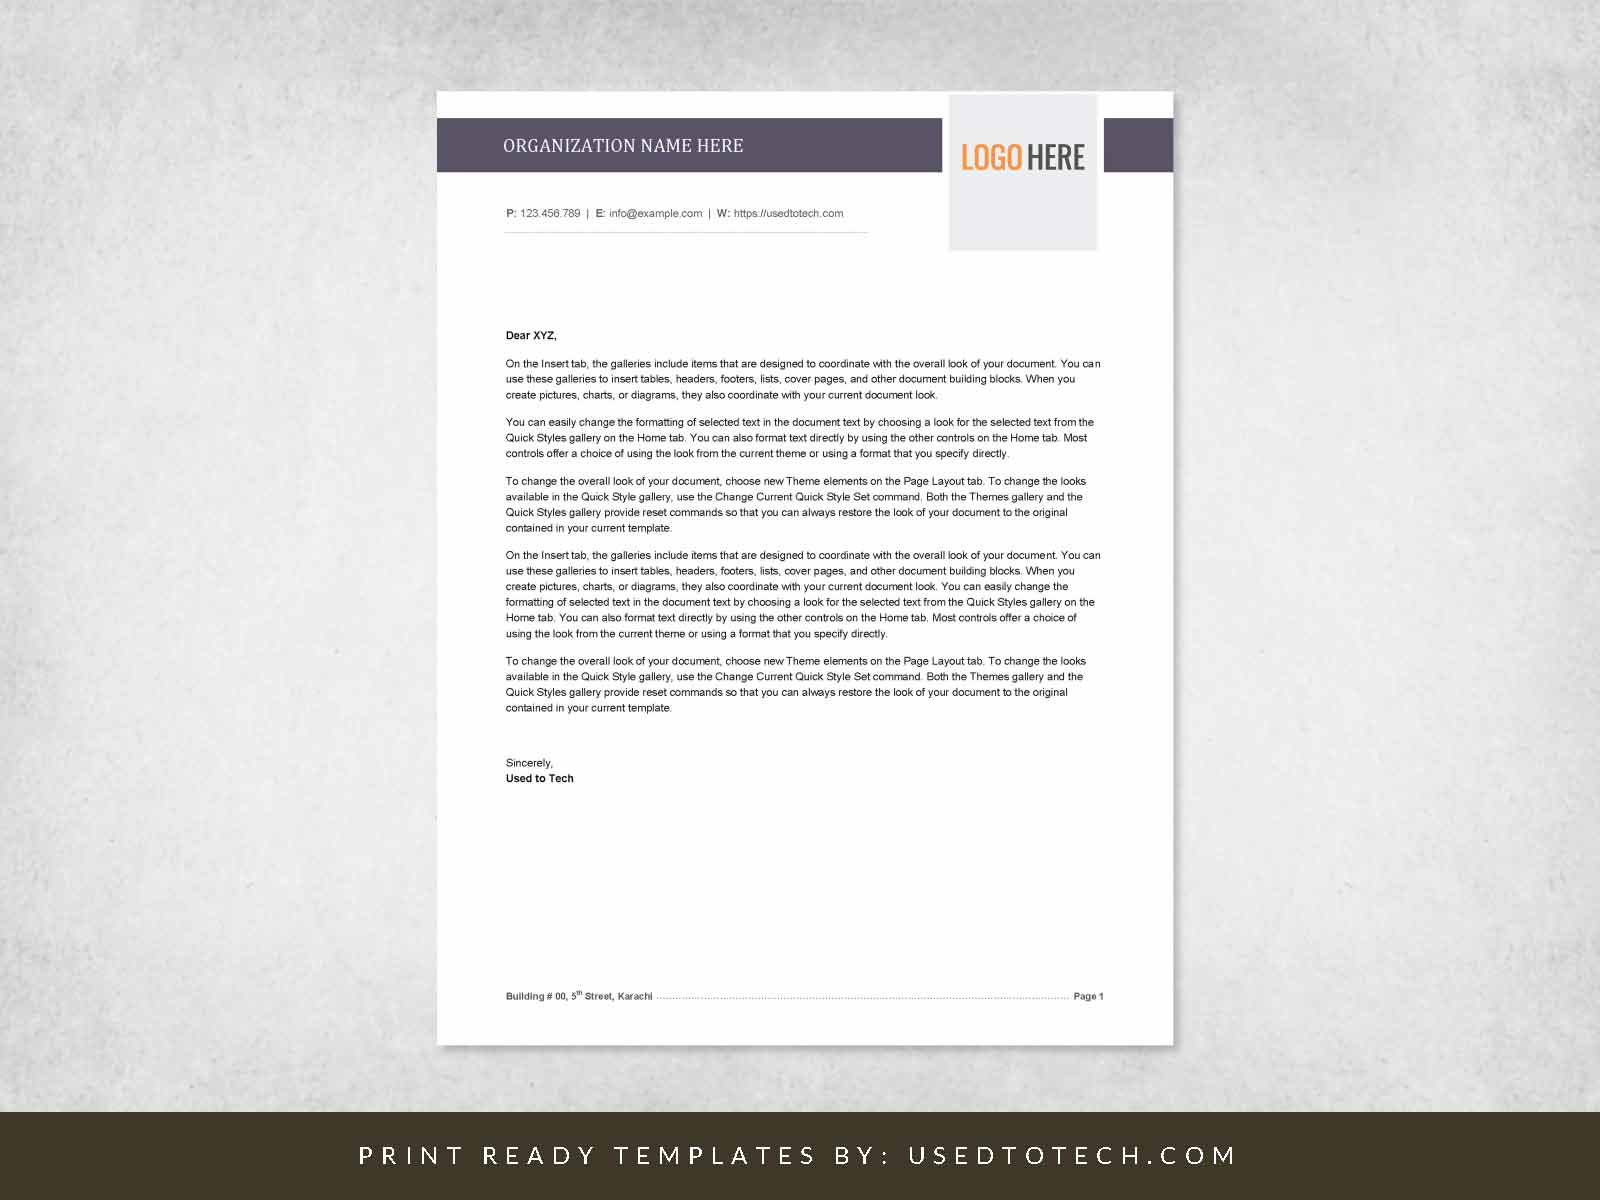 Word format for letterhead with polished layout